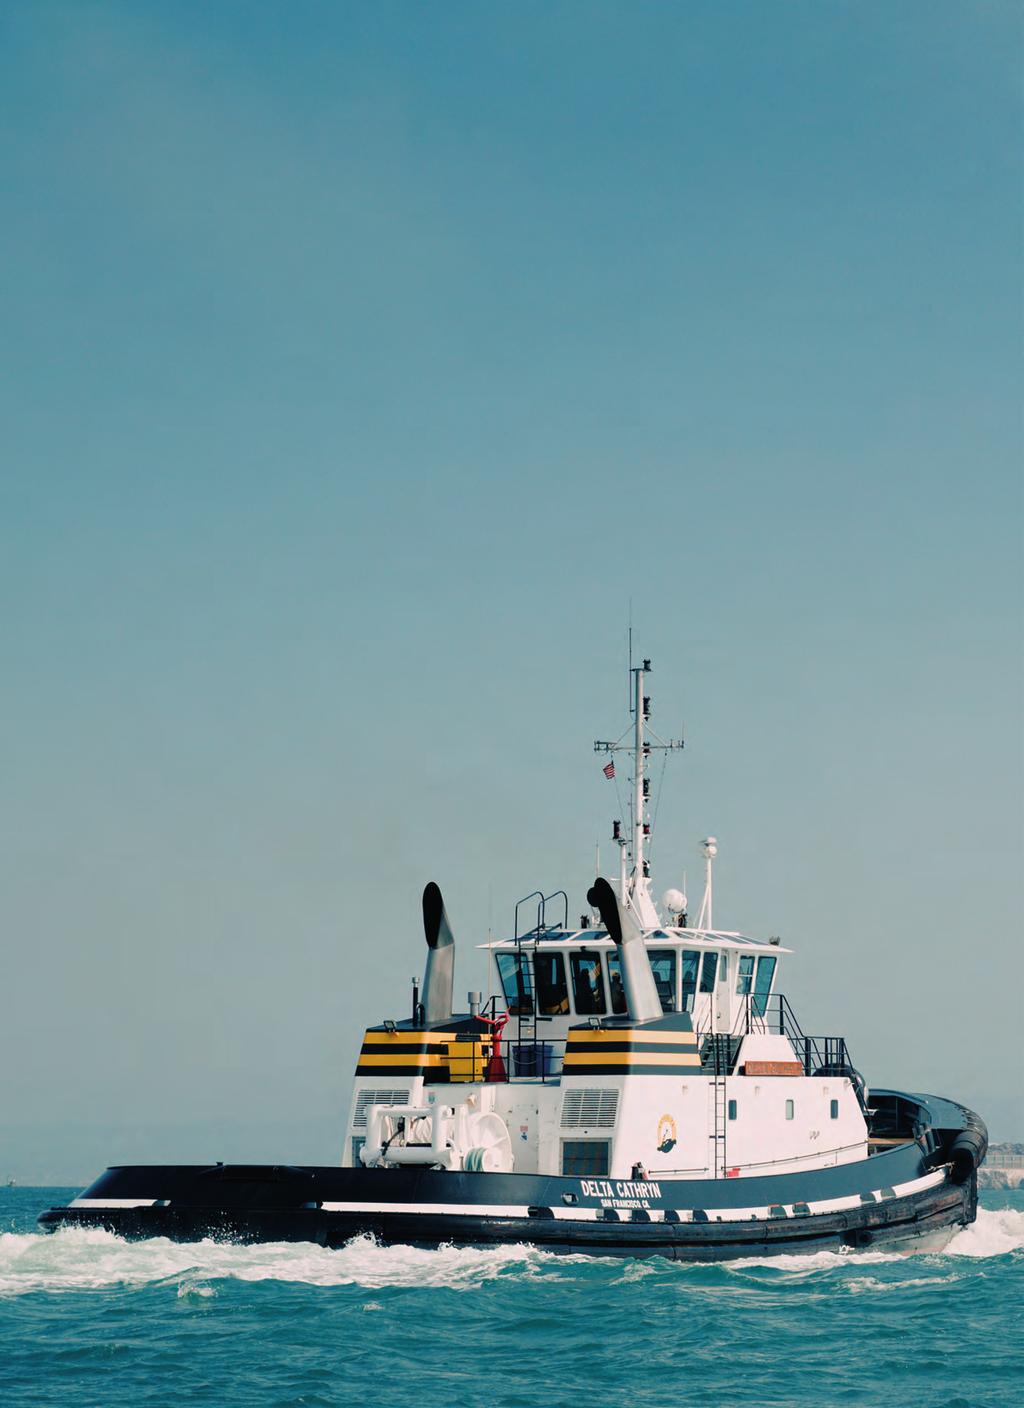 latest tug technology t h r u s t i n g ahead w i t h our propulsion products T oday s key tug propulsion product from the Rolls-Royce portfolio is the US range of azimuth thrusters.